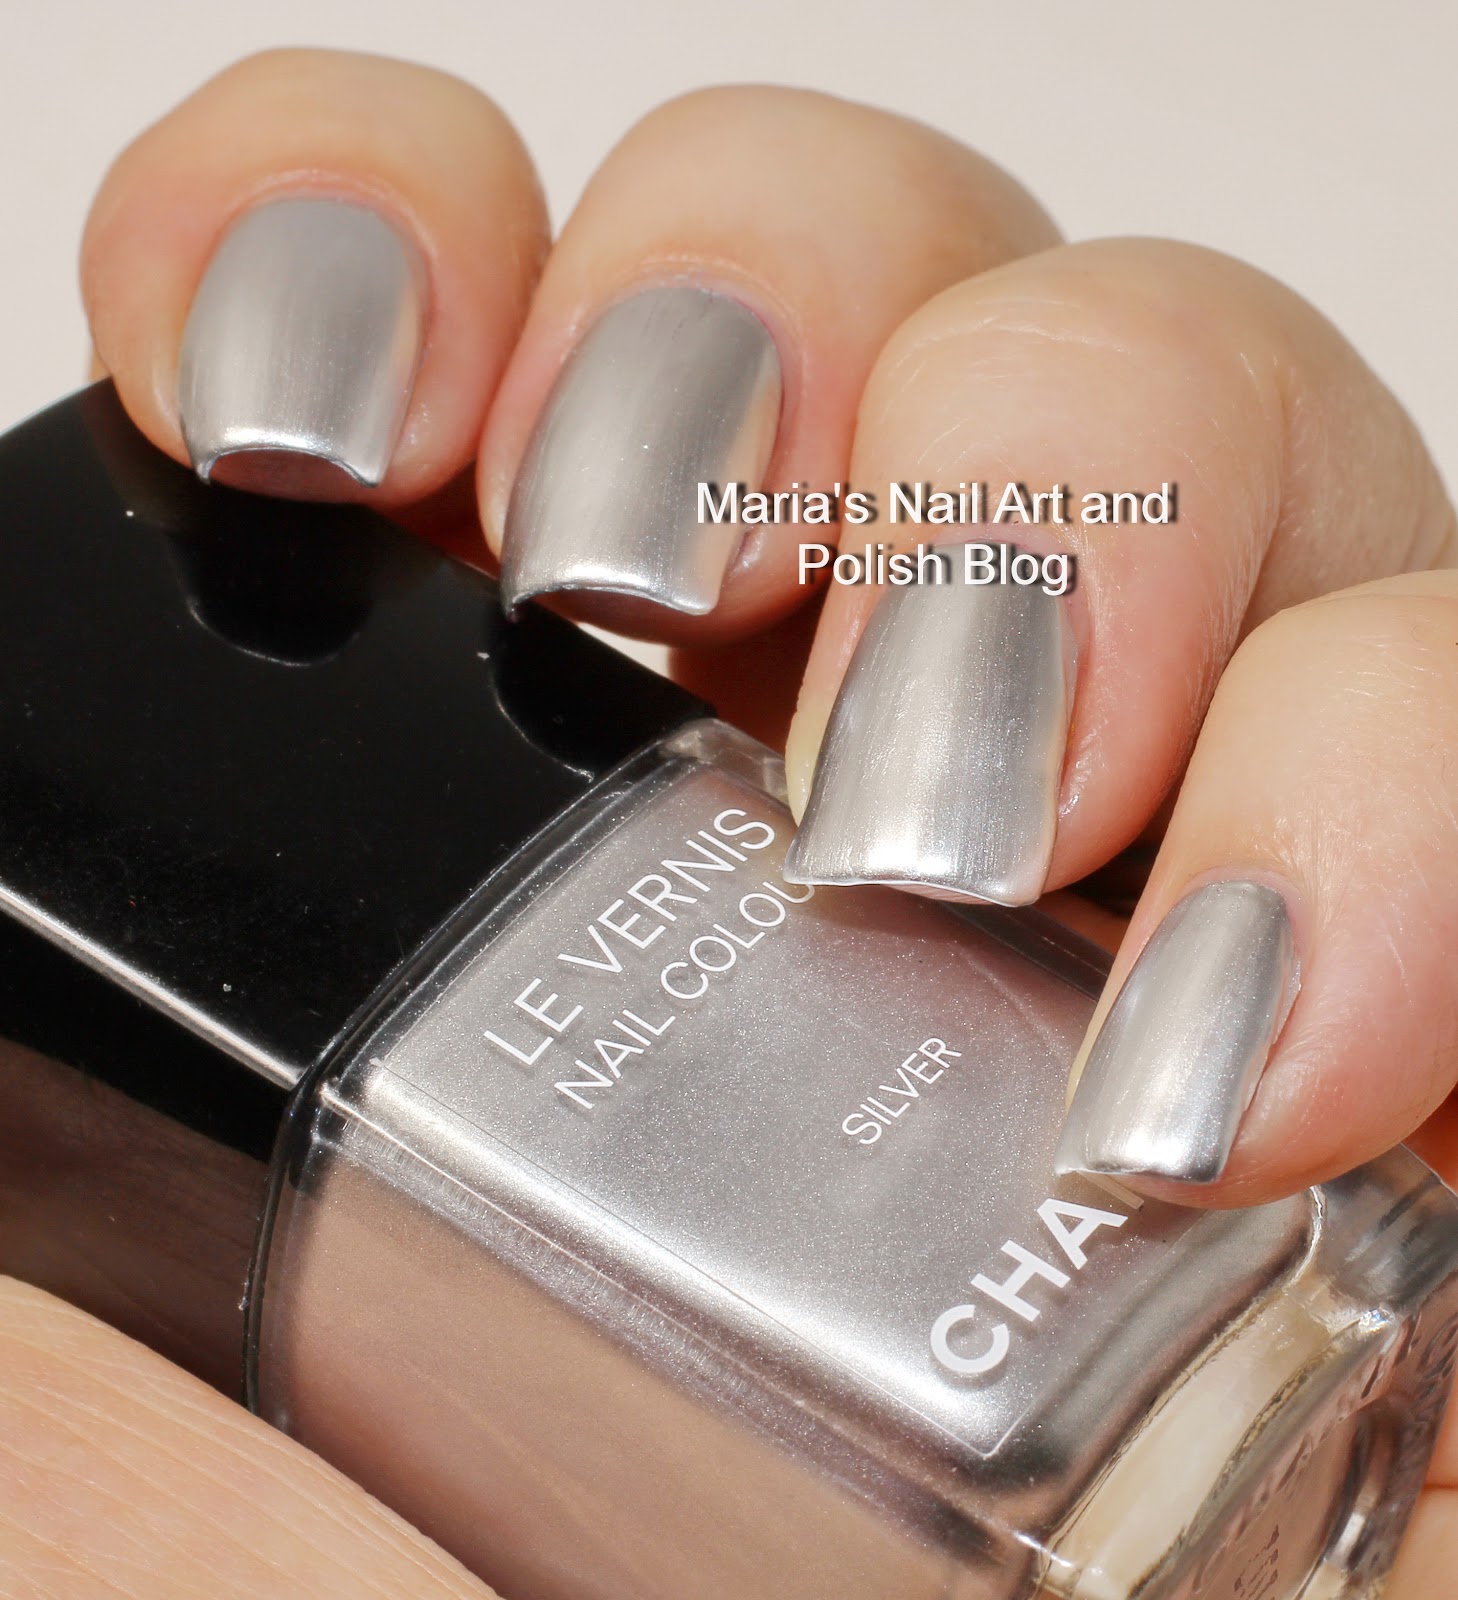 Marias Nail Art and Polish Blog: Chanel Accessoire 573 - swatches